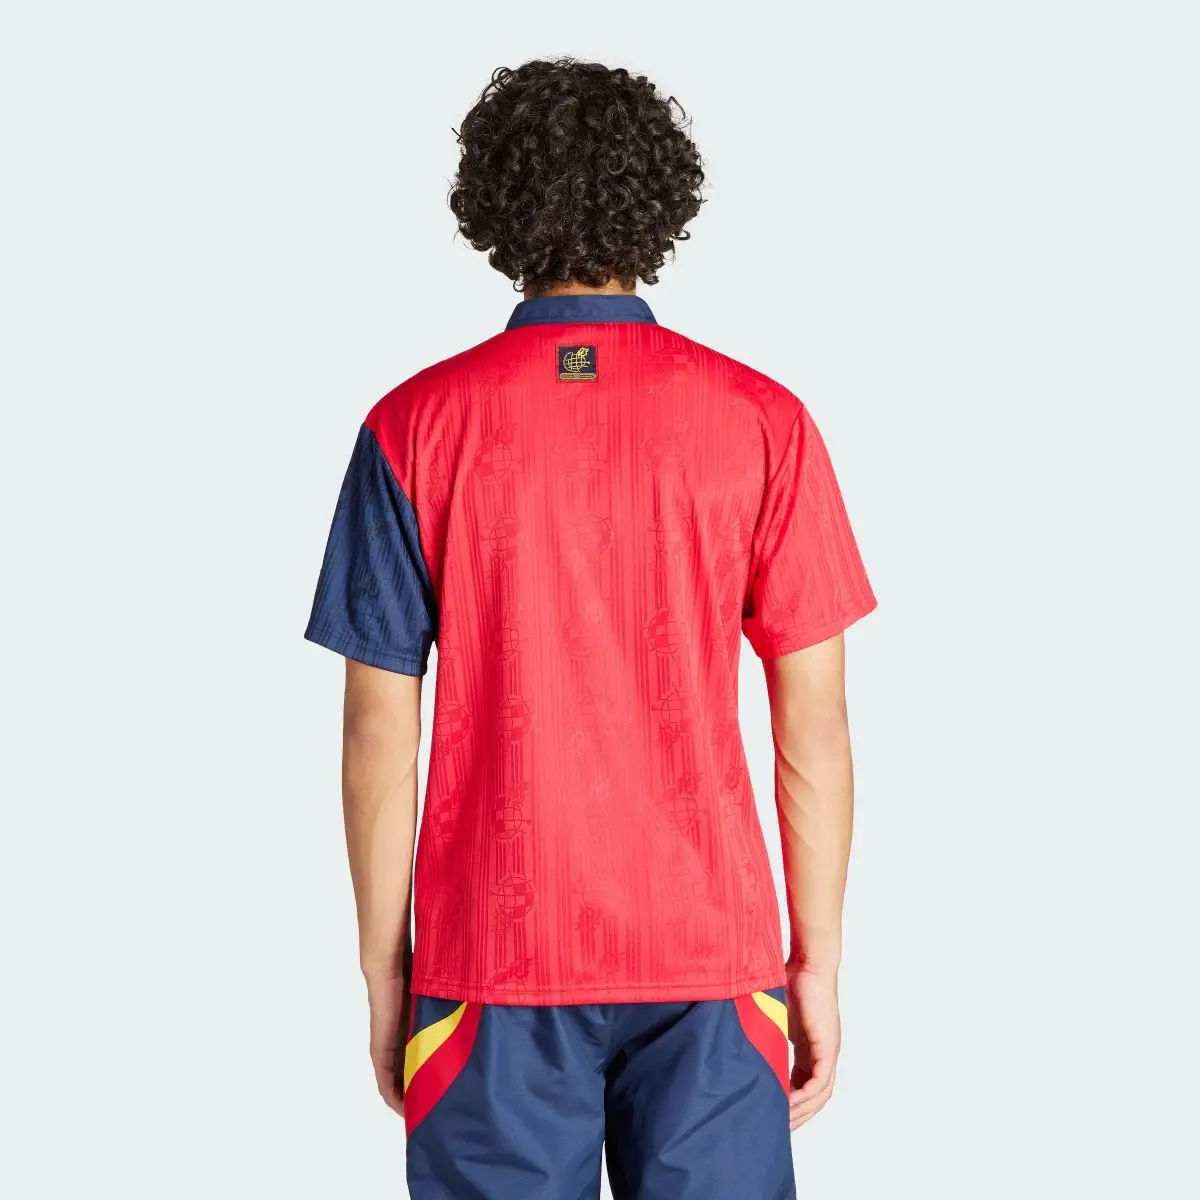 Adidas Spain 1996 Home Jersey. 3